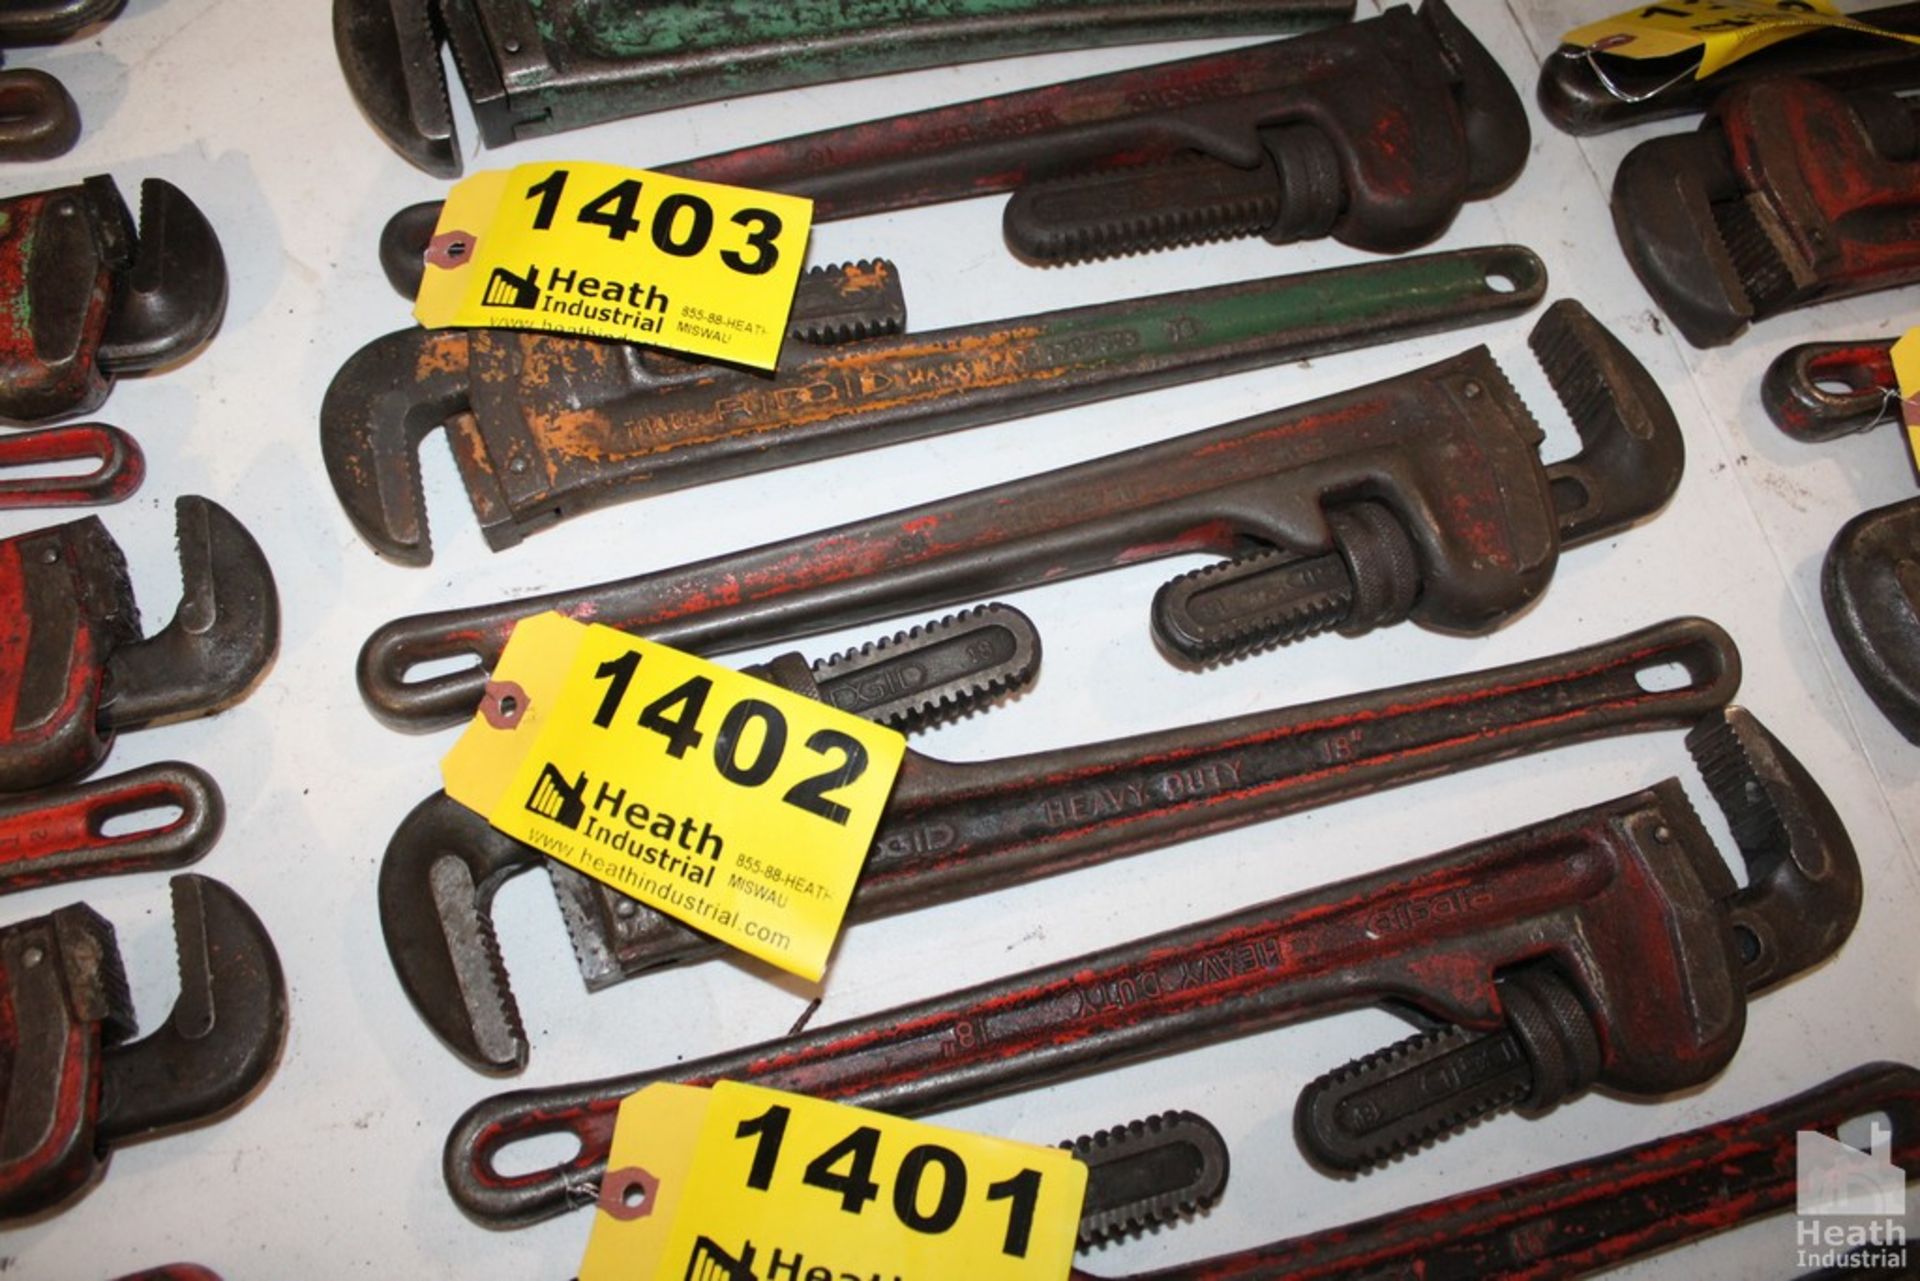 (2) RIDGID 18" PIPE WRENCHES